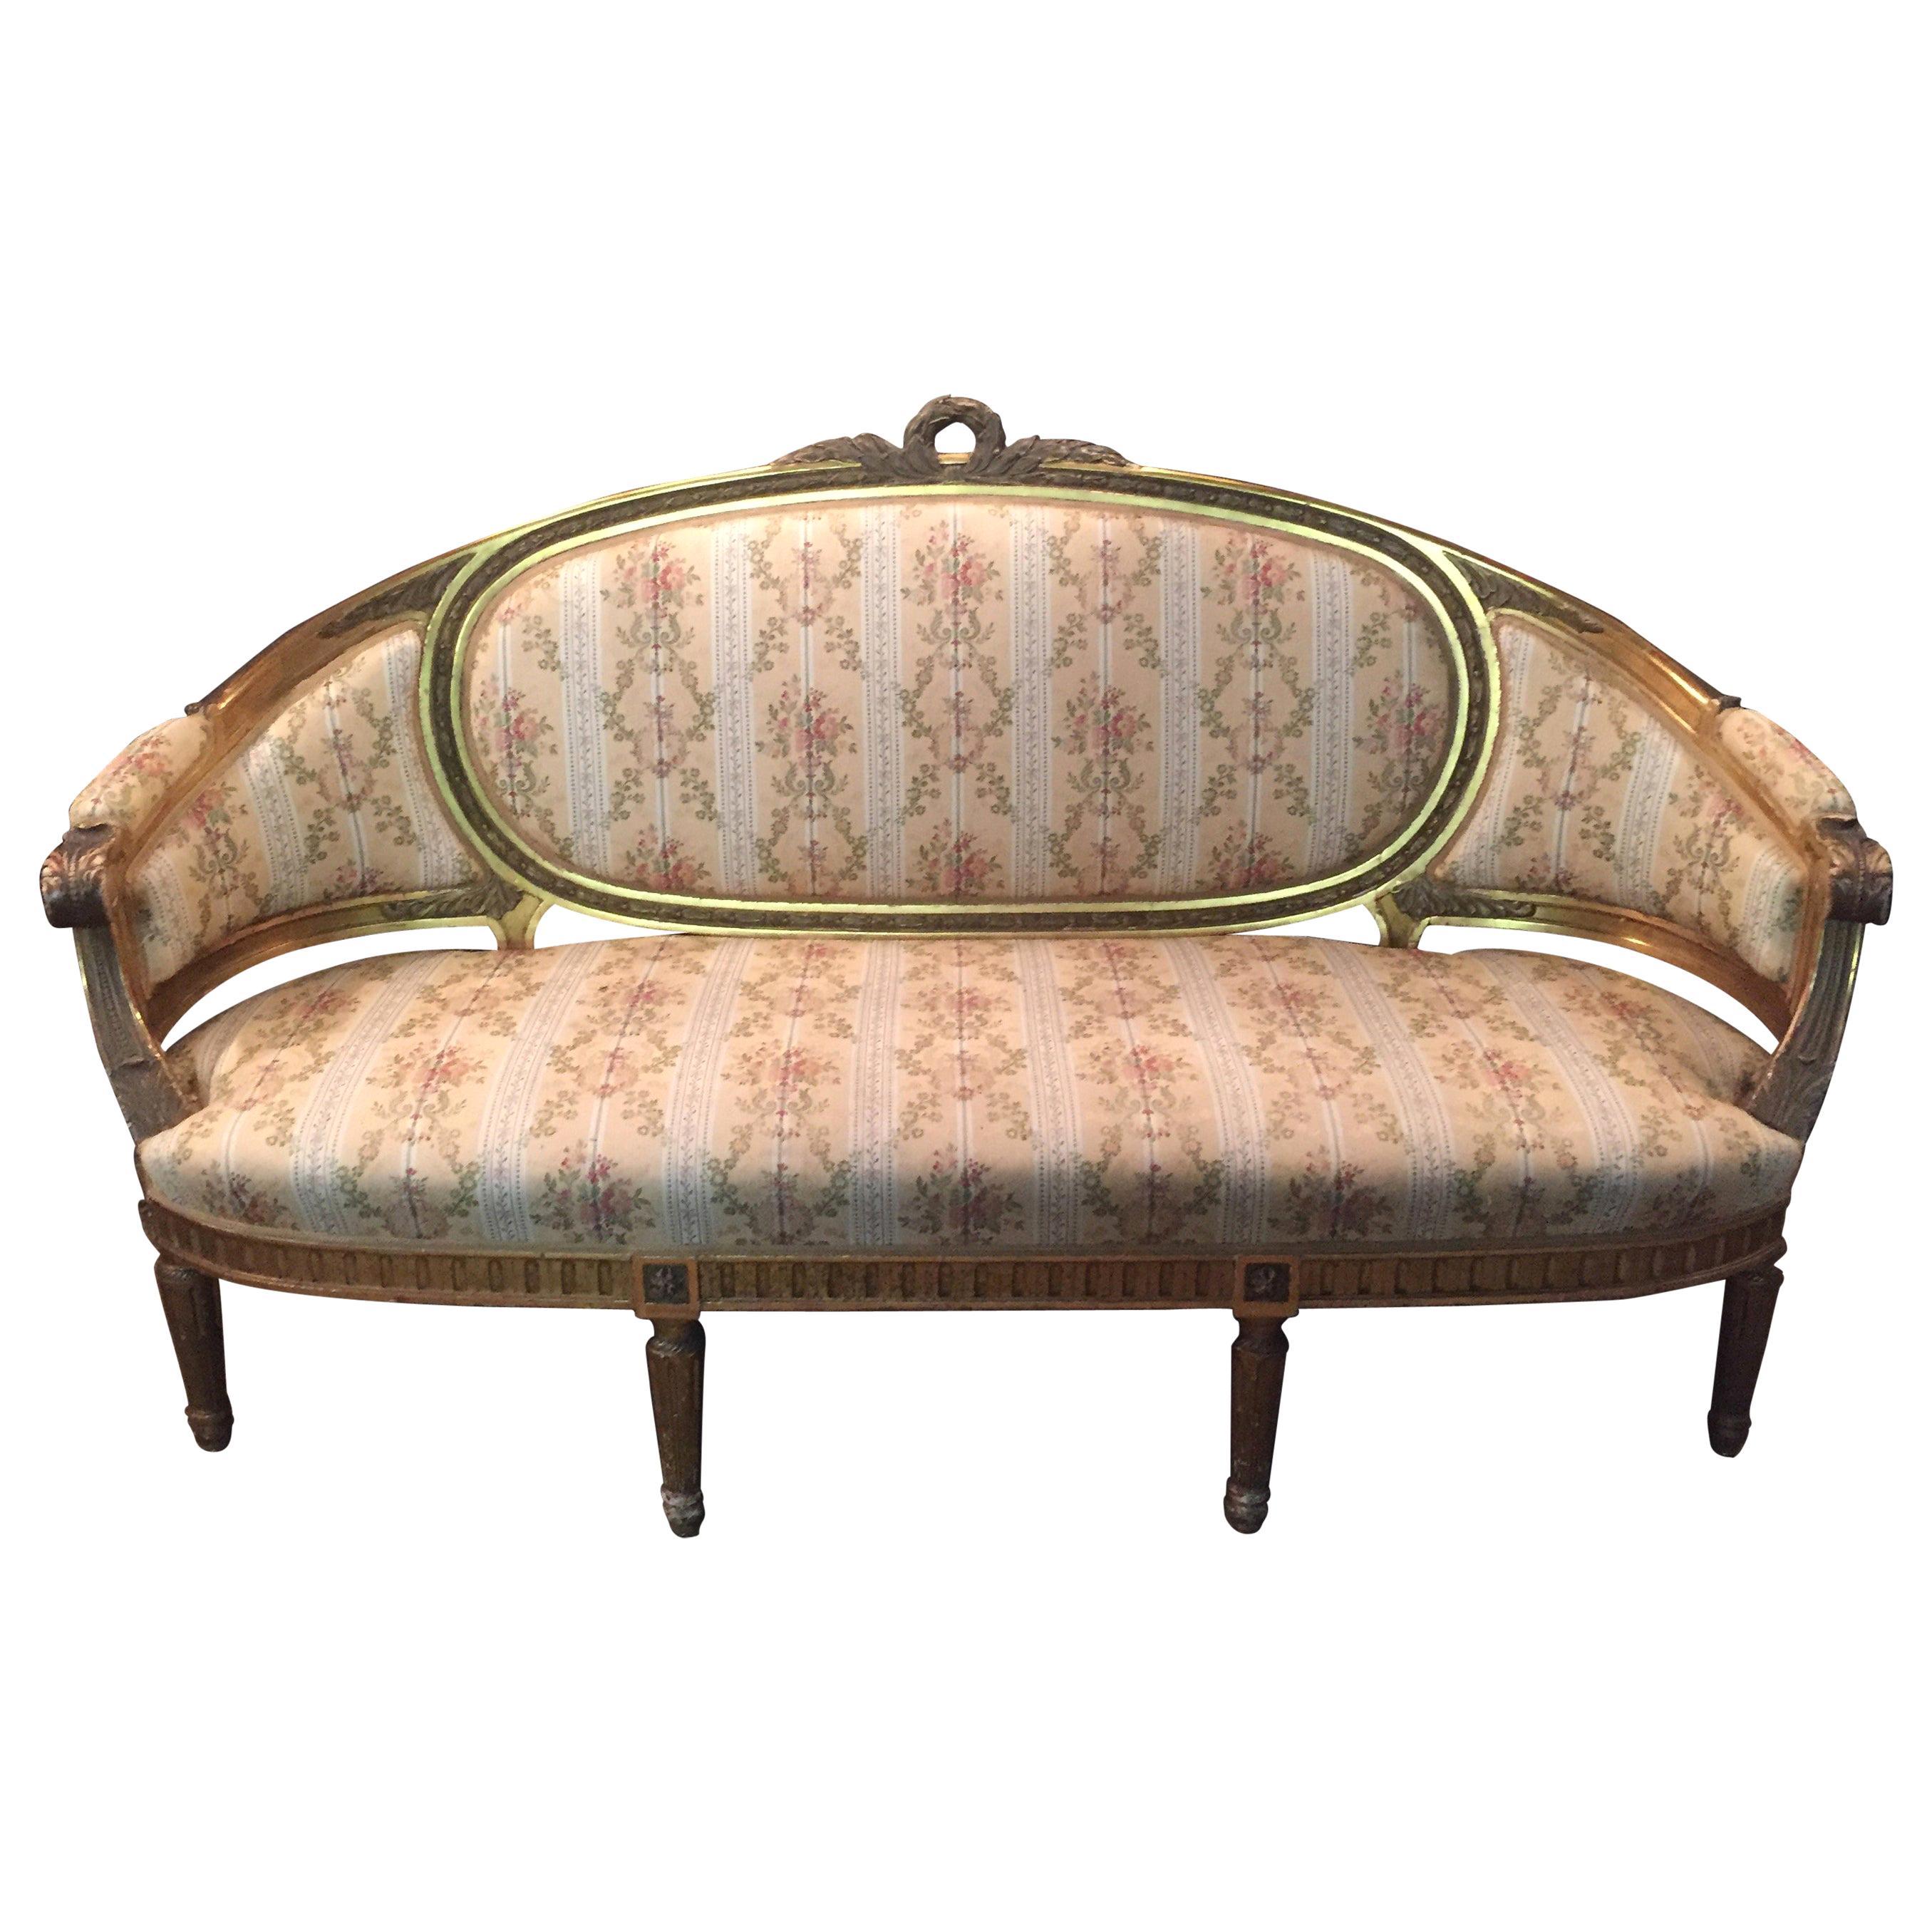 19th Century Sofa in Louis XVI Style, Solid Beechwood Poliment Gilded